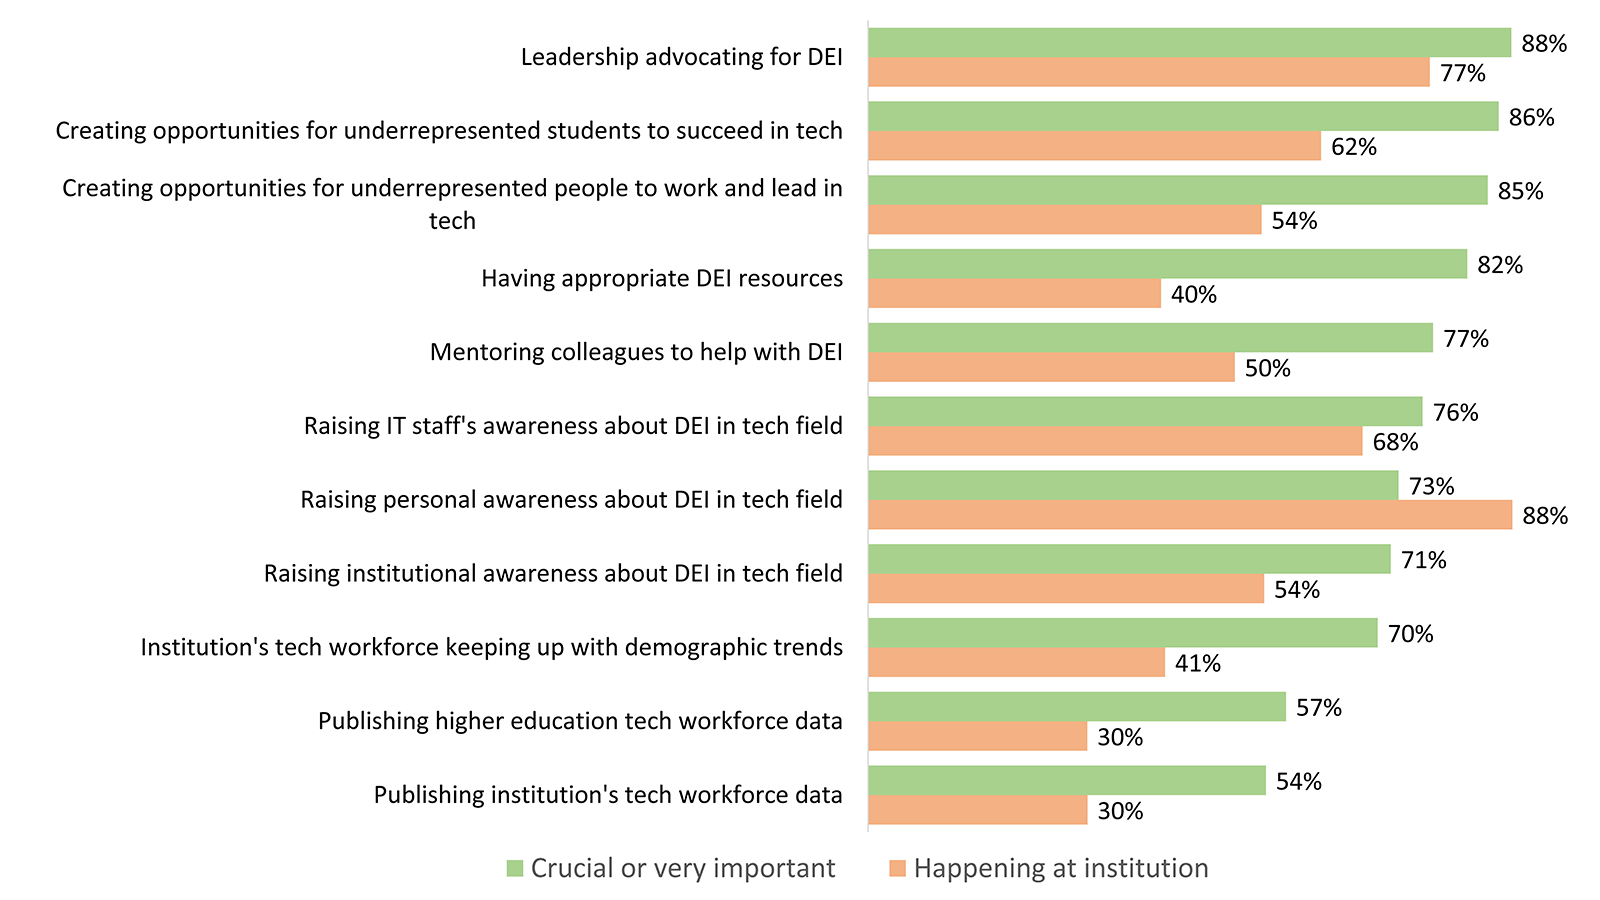 Bar graph showing the percentage of respondents who said each item was crucial at their institution (C) and Happening at their institution (H).
Leadership advocating for DEI: C 88%, H 77%.
Creating opportunities for underrepresented students to succeed in tech: C 86%, H 62%.
Creating opportunities for underrepresented people to work and lead in tech: C 85%, H 54%.
Having appropriate DEI resources: C 82%, H 40%.
Mentoring colleagues to help with DEI: C 77%, H 50%.
Raising IT staff's awareness about DEI in tech field: C 76%, H 68%.
Raising personal awareness about DEI in tech field: C 73%, H 88%.
Raising institutional awareness about DEI in tech field: C 71%, H 54%.
Institution's tech workforce keeping up with demographic trends: C 70%, H 41%.
Publishing higher education tech workforce data: C 57%, H 30%.
Publishing institution's tech workforce data: C 54%, H 30%.